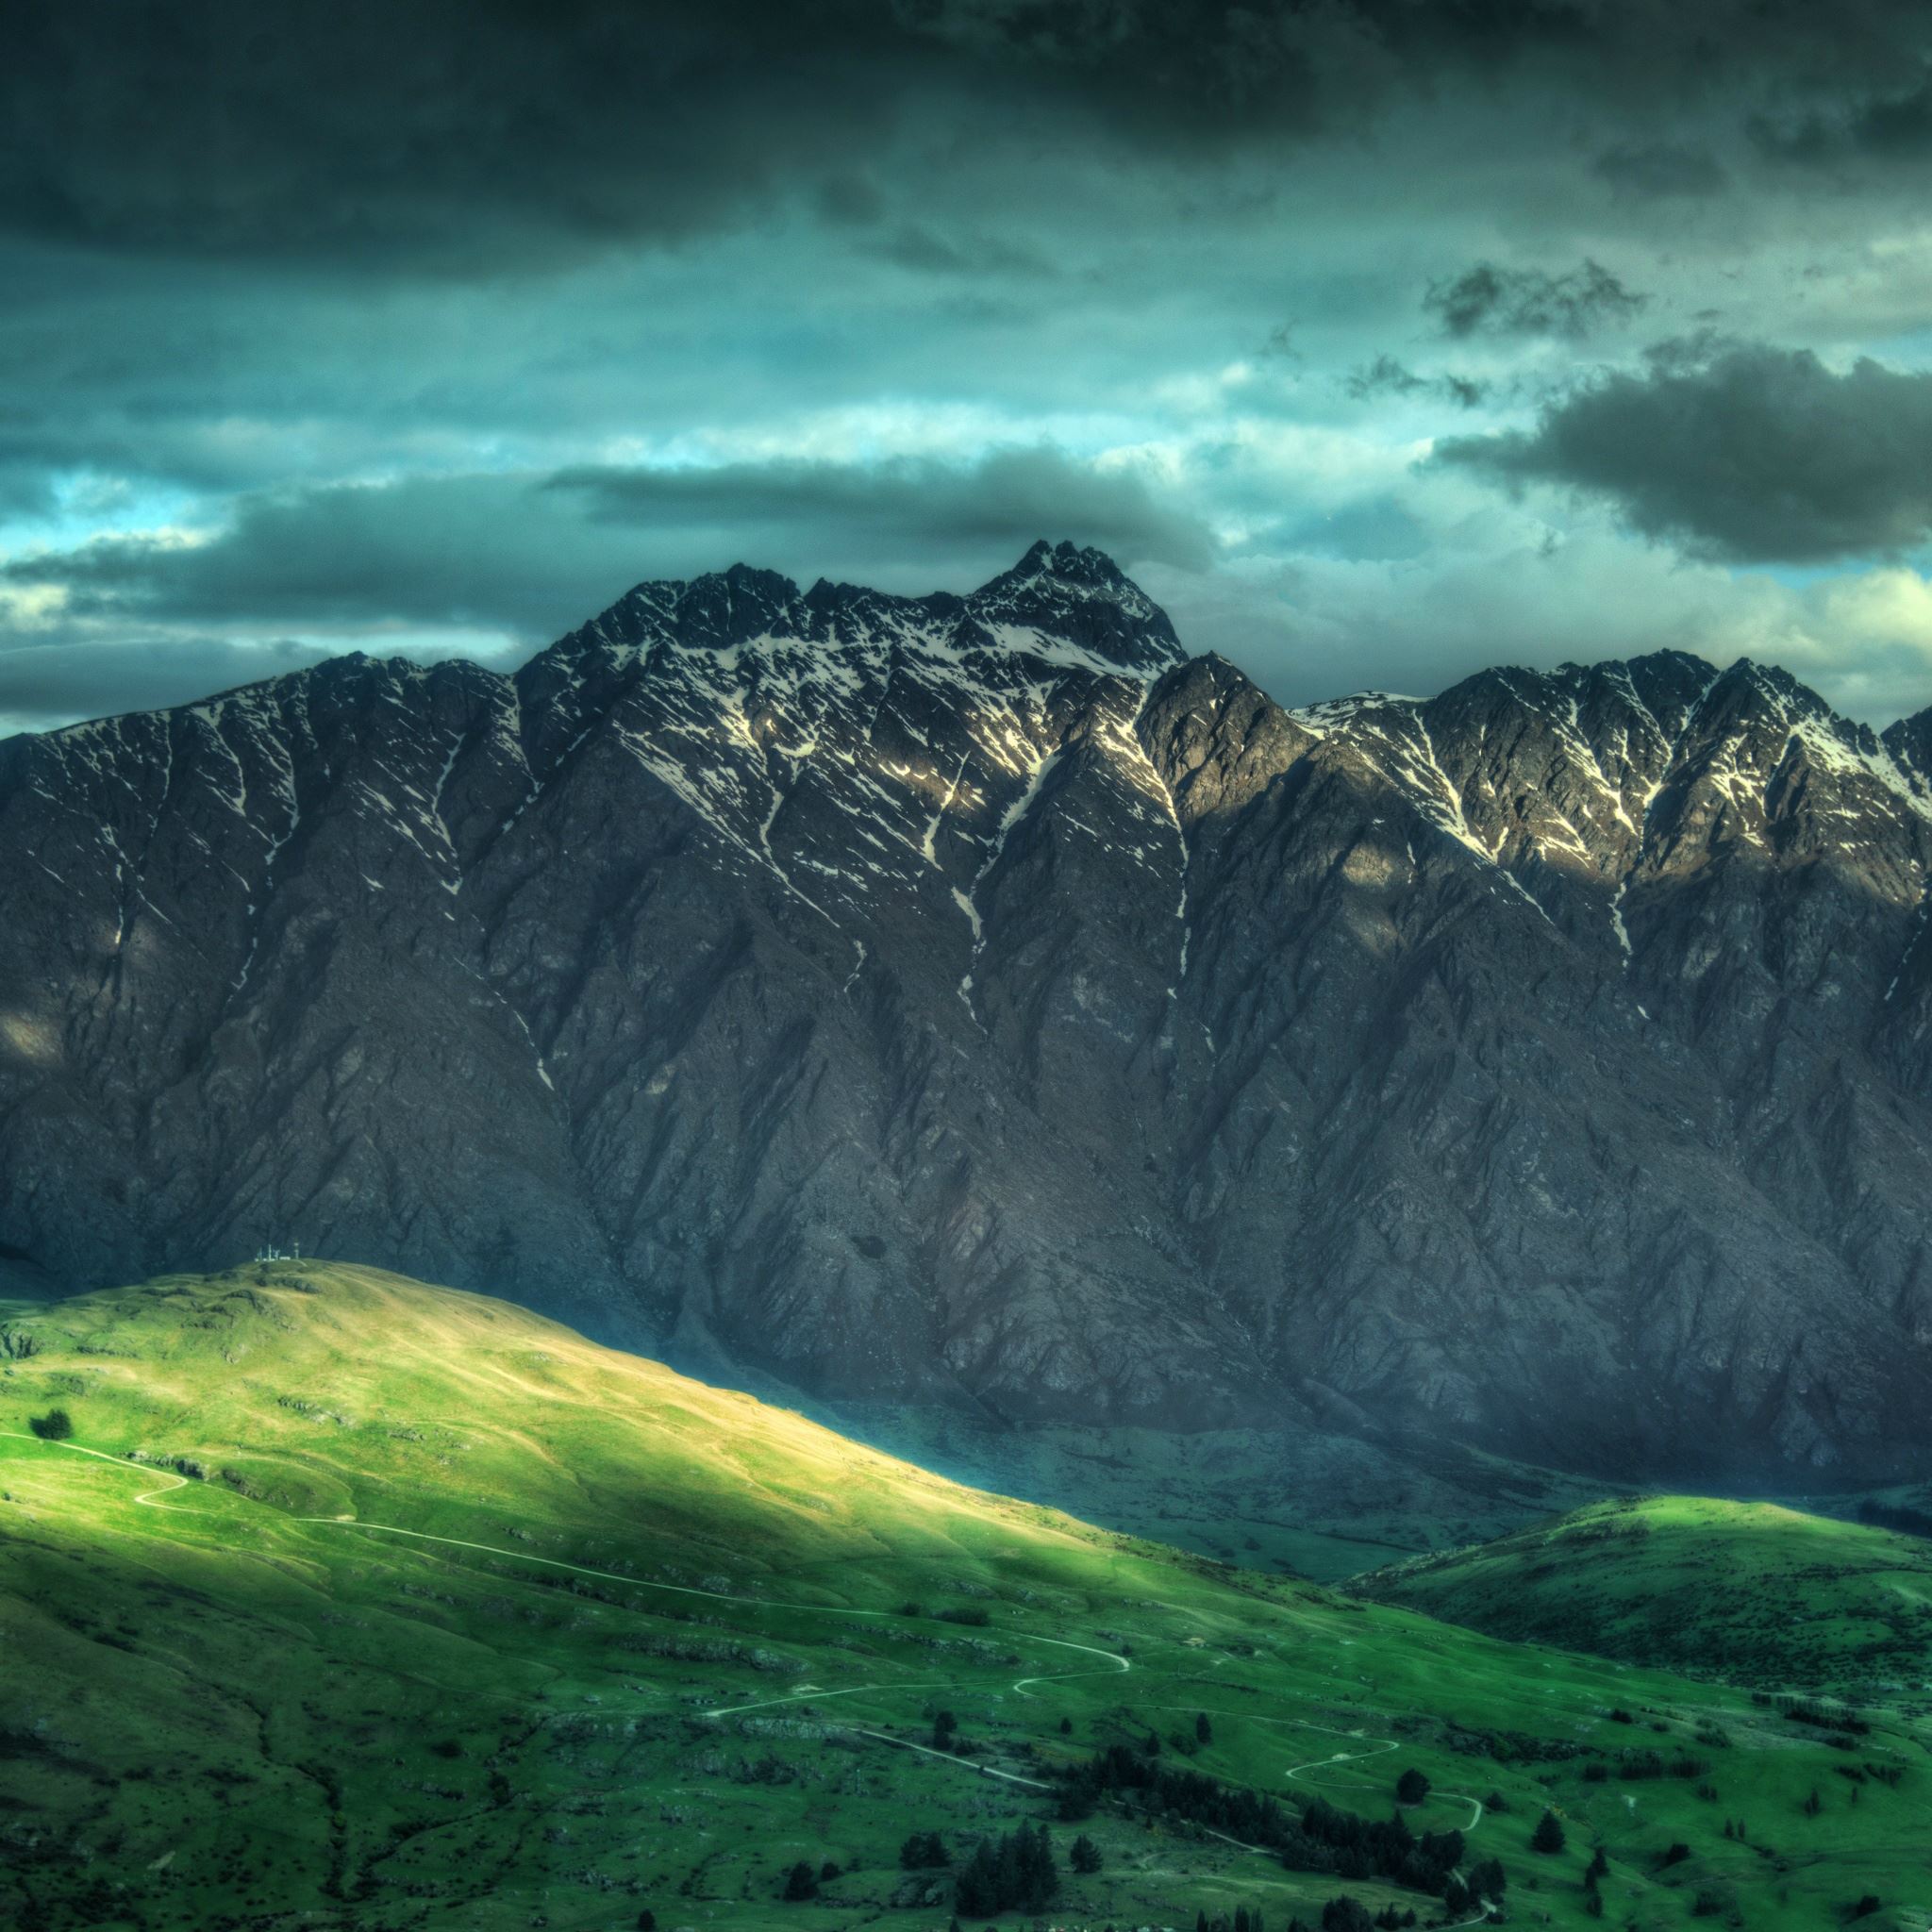 Mountains Landscape In New Zealand iPad Air wallpaper 